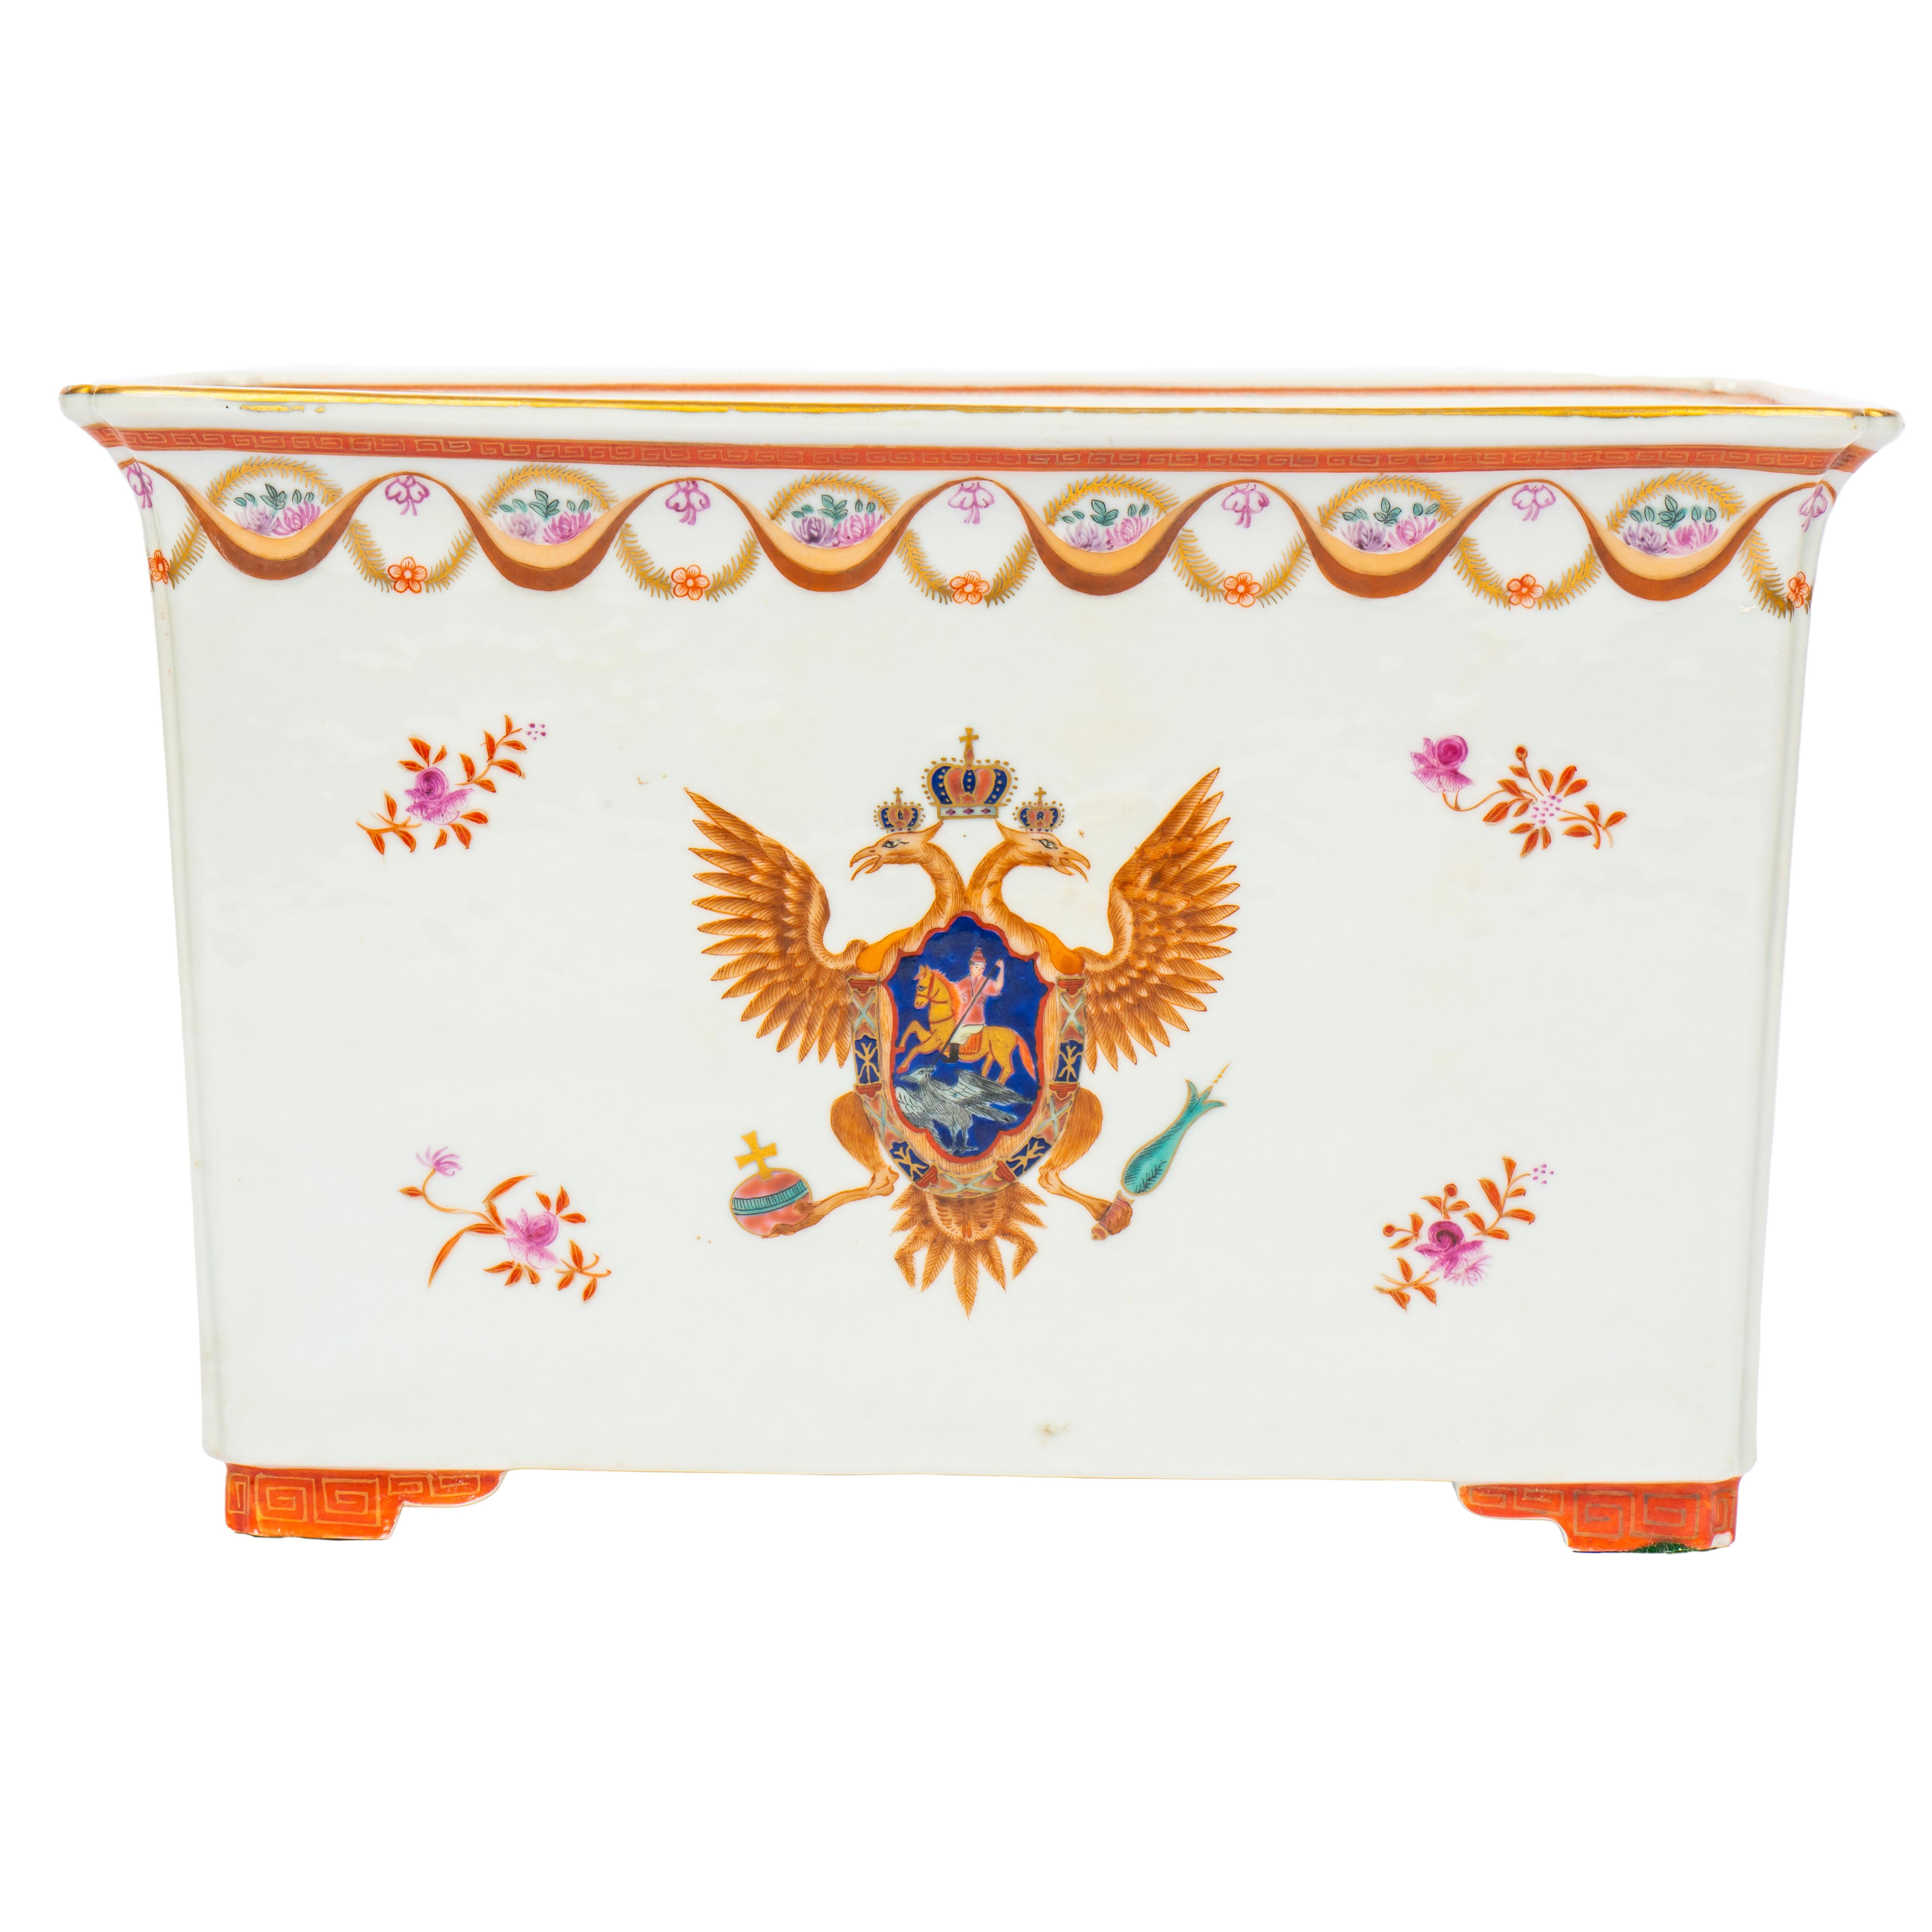 Recalling the Chinese export service ordered by Empress Catherine the Great in the 18th century for the Russian imperial court, this colorful and festive jardinière or planter, is decorated front and back with a stylized imperial Russian double